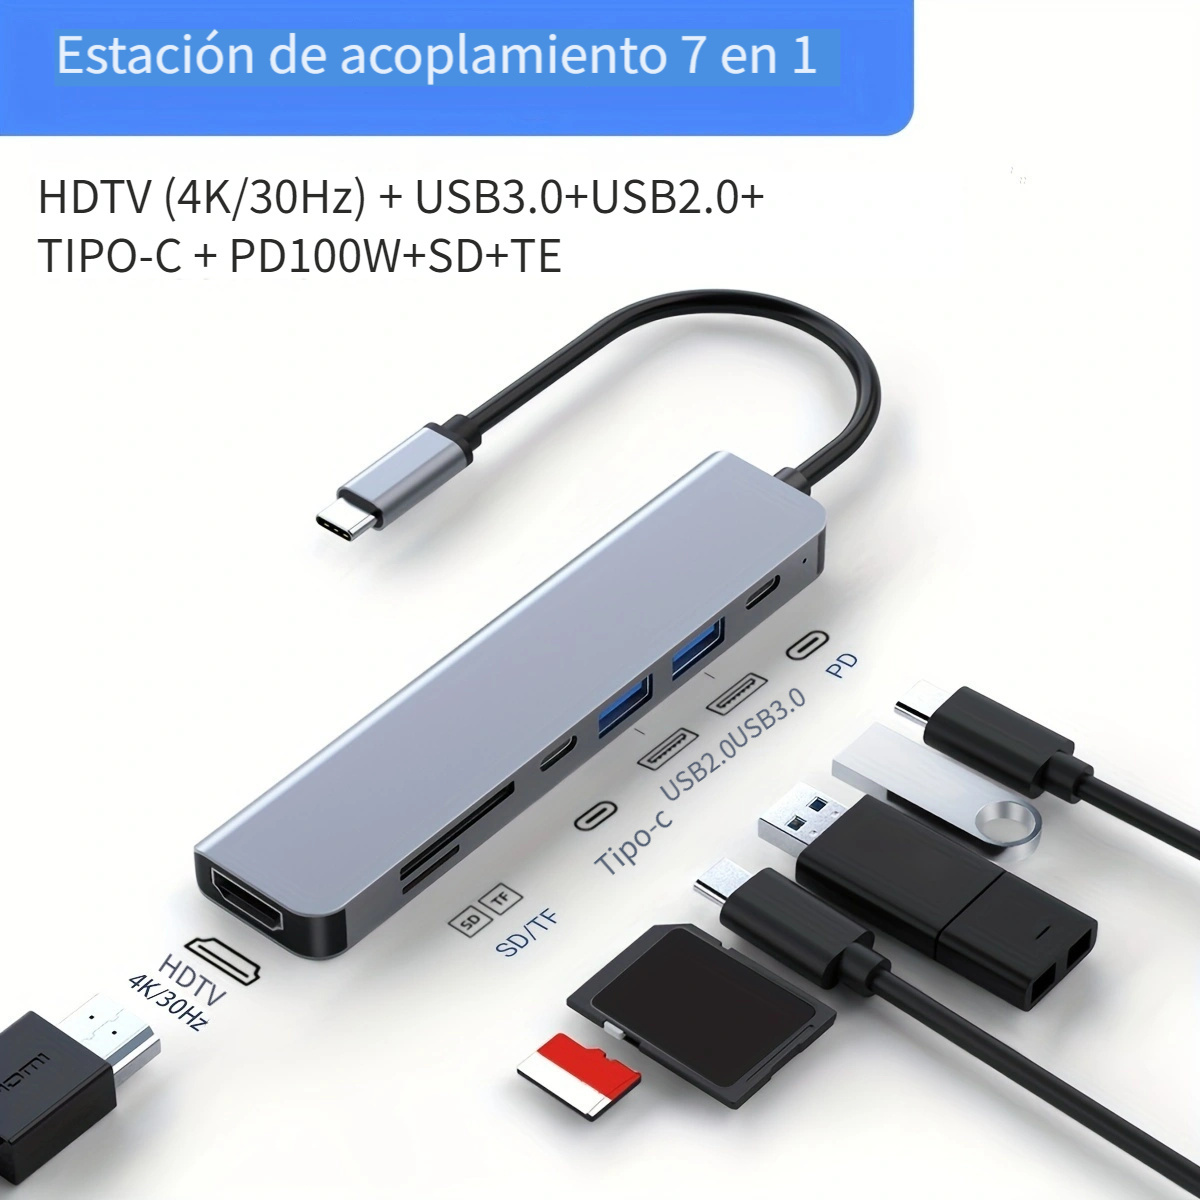 Usb 3.0 Hub Splitter With Card Reader 6in1 4ft Extension Long